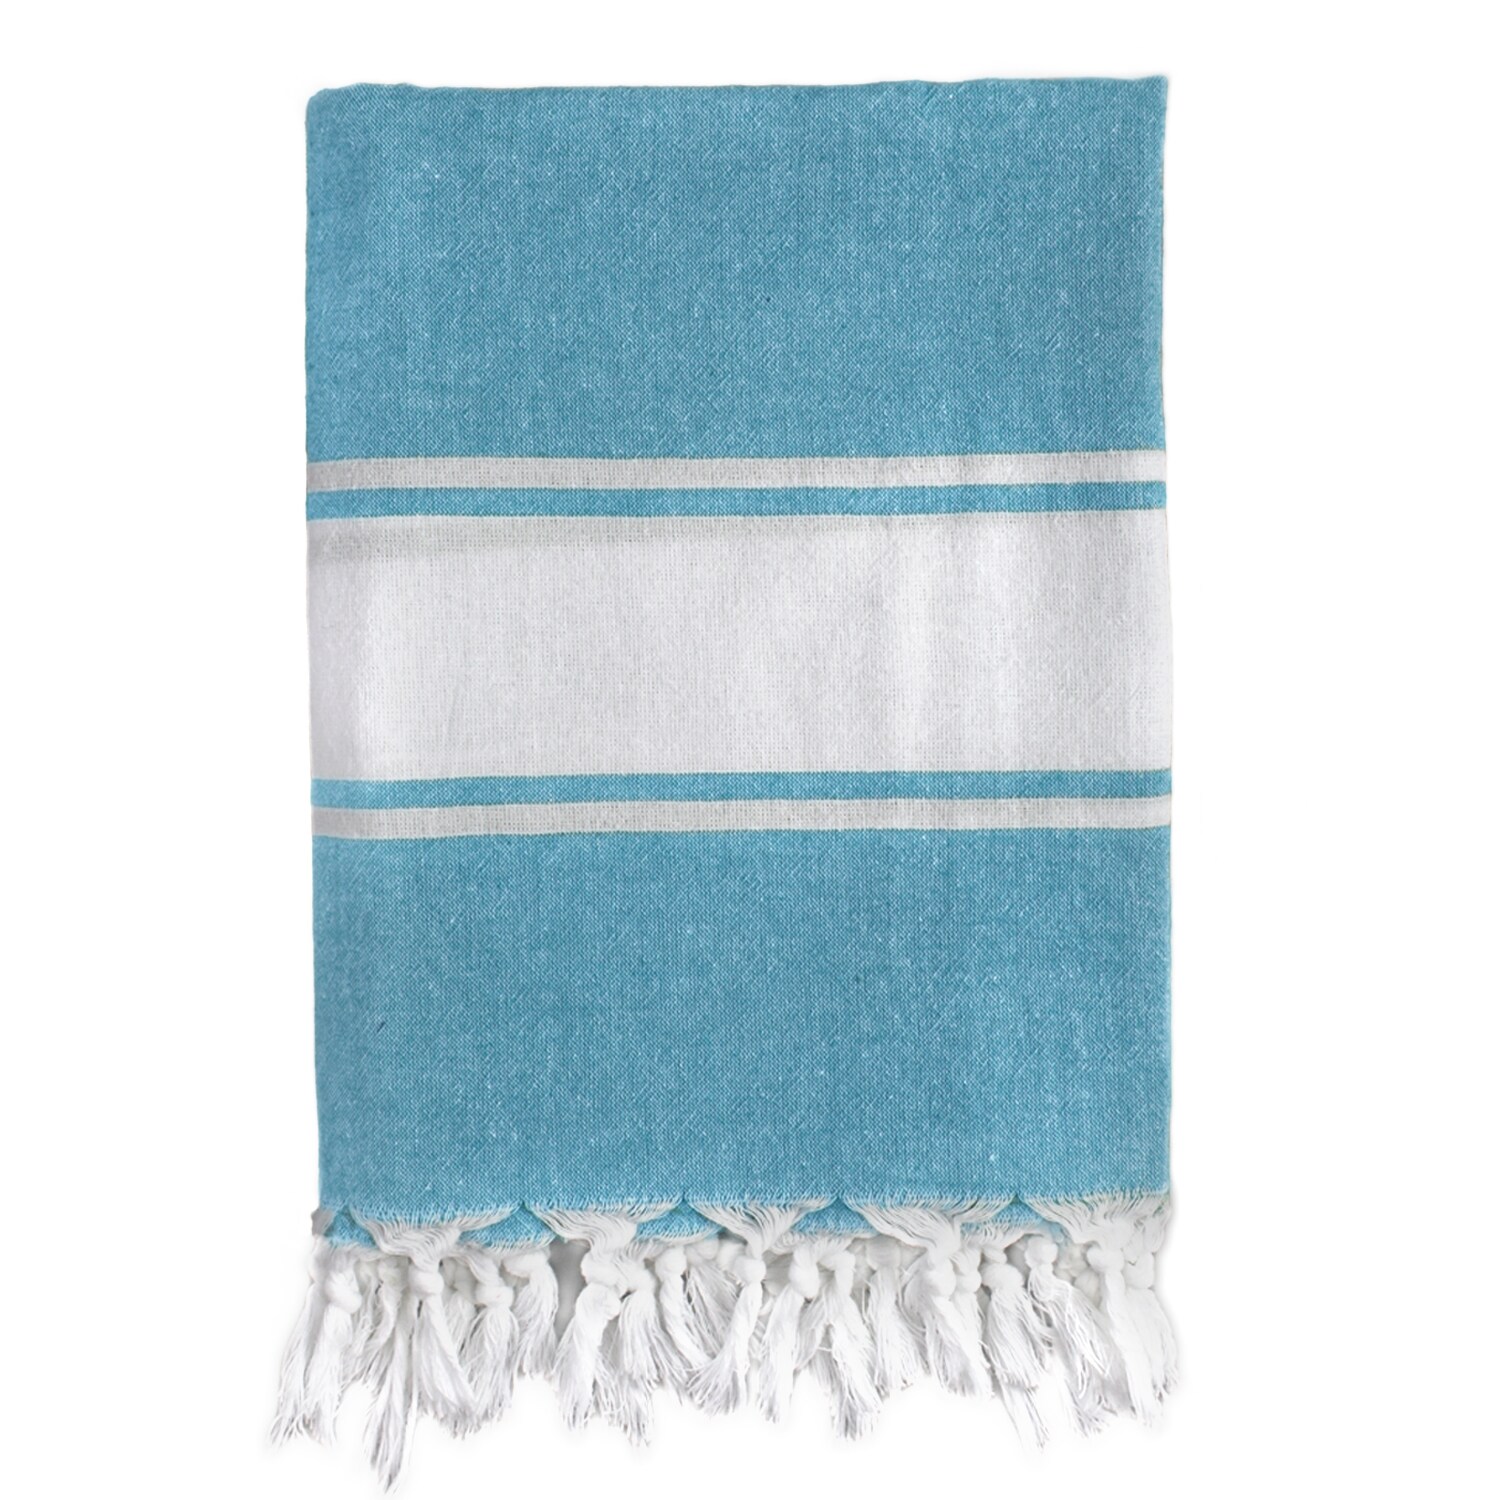 Classic Blue Stripe Turkish Fouta Bath/ Beach Towel (Blue Materials 100 percent Turkish Cotton Care instructions Machine wash cold. Gentle cycle with like color. No bleach mild detergent. Tumble dry low. Dimensions 36 inches x 67 inches The digital ima